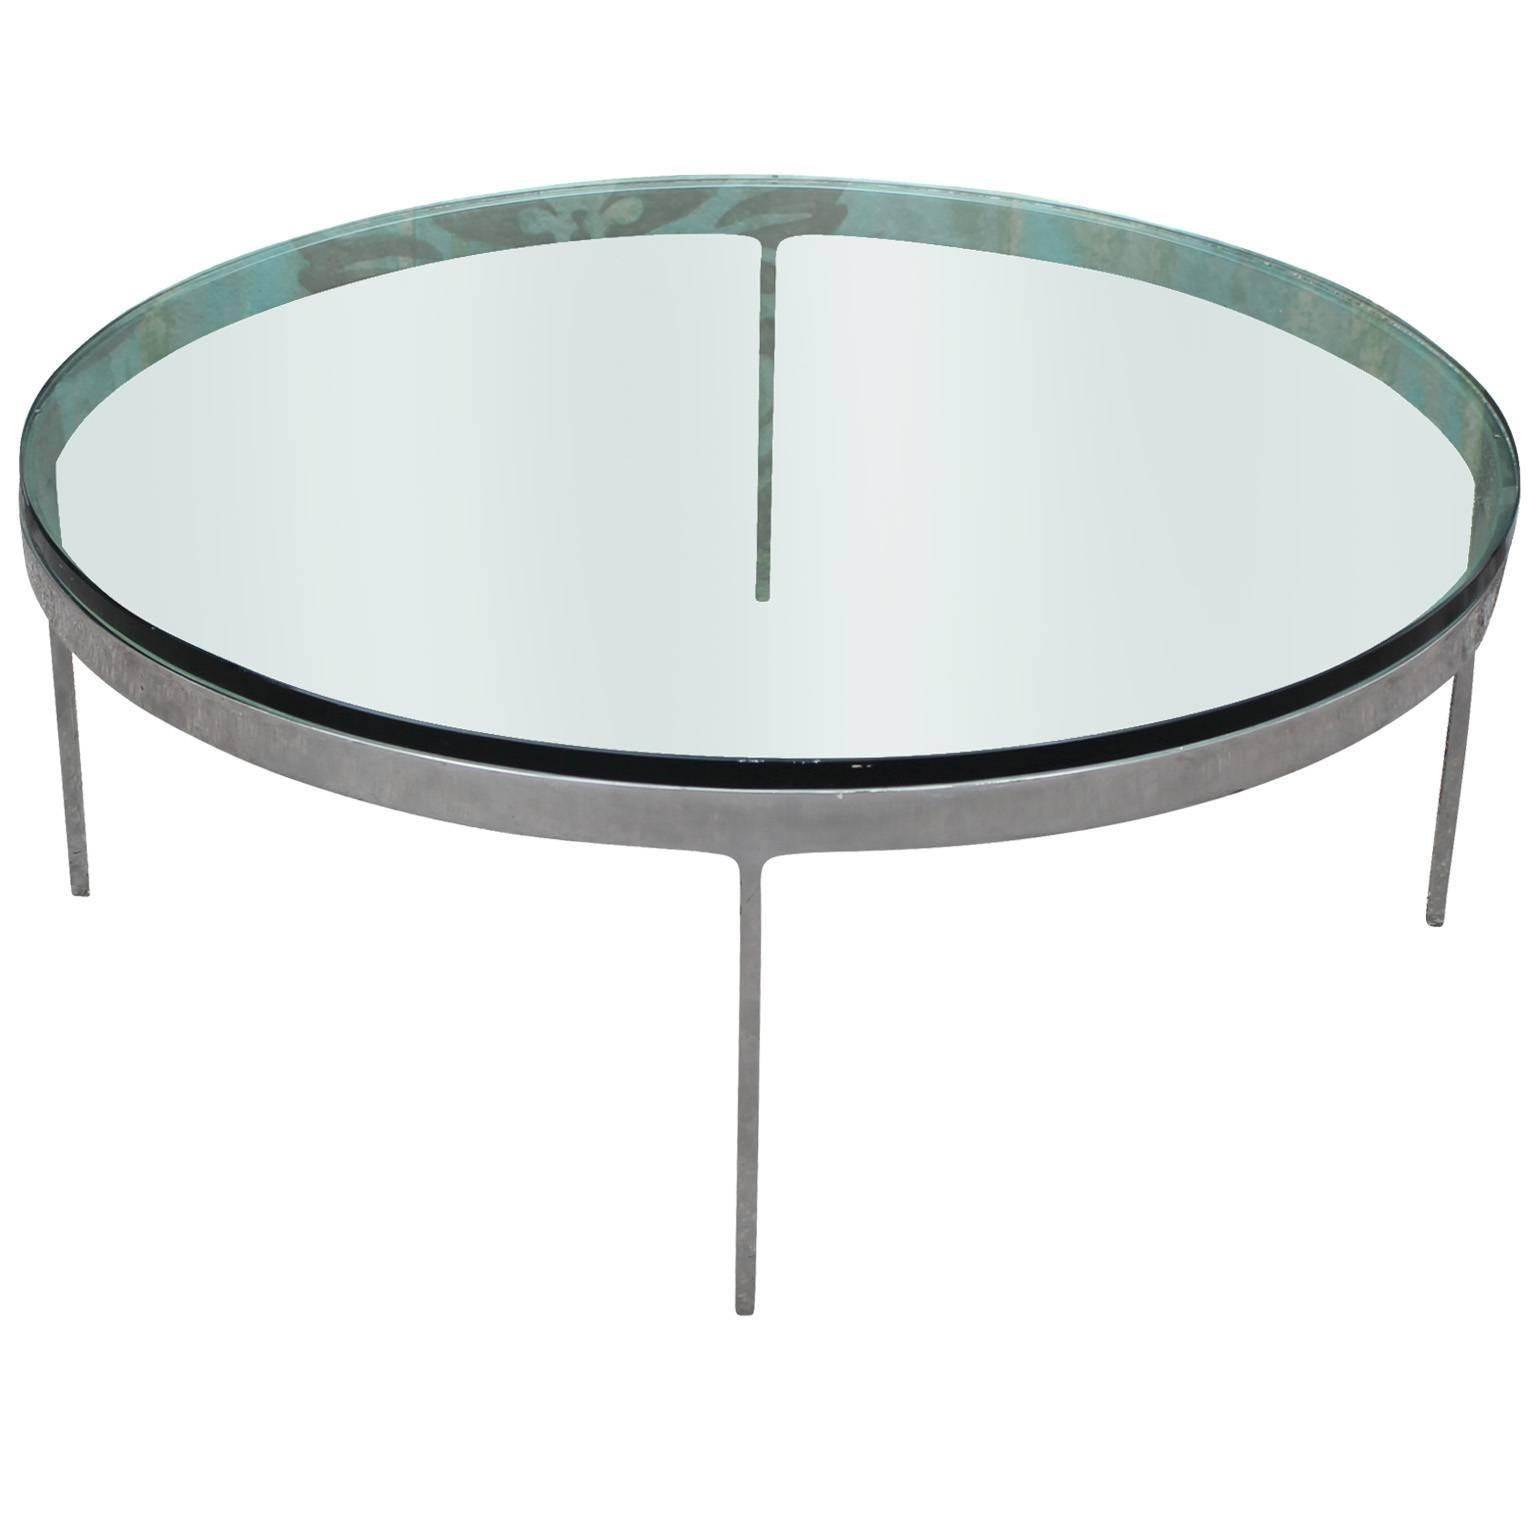 Excellent Steel and Glass Nicos Zographos Round Coffee Table